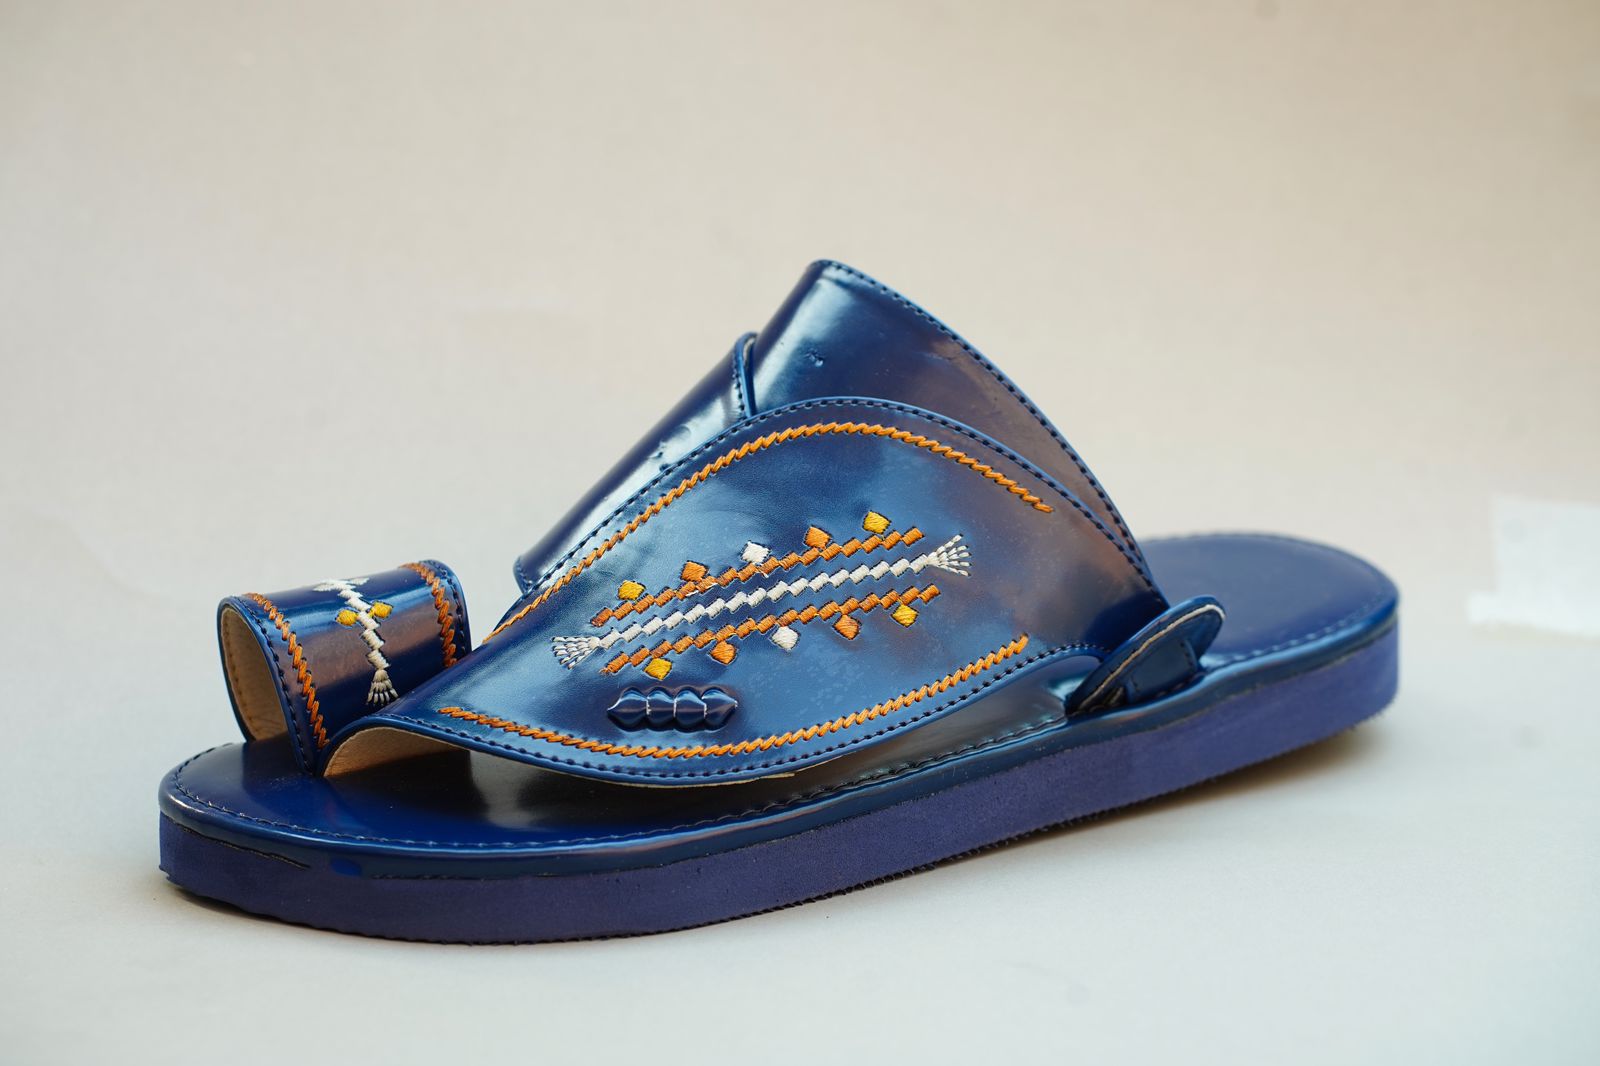 Arabic Khaliji Sandals  with iconic Embroidery